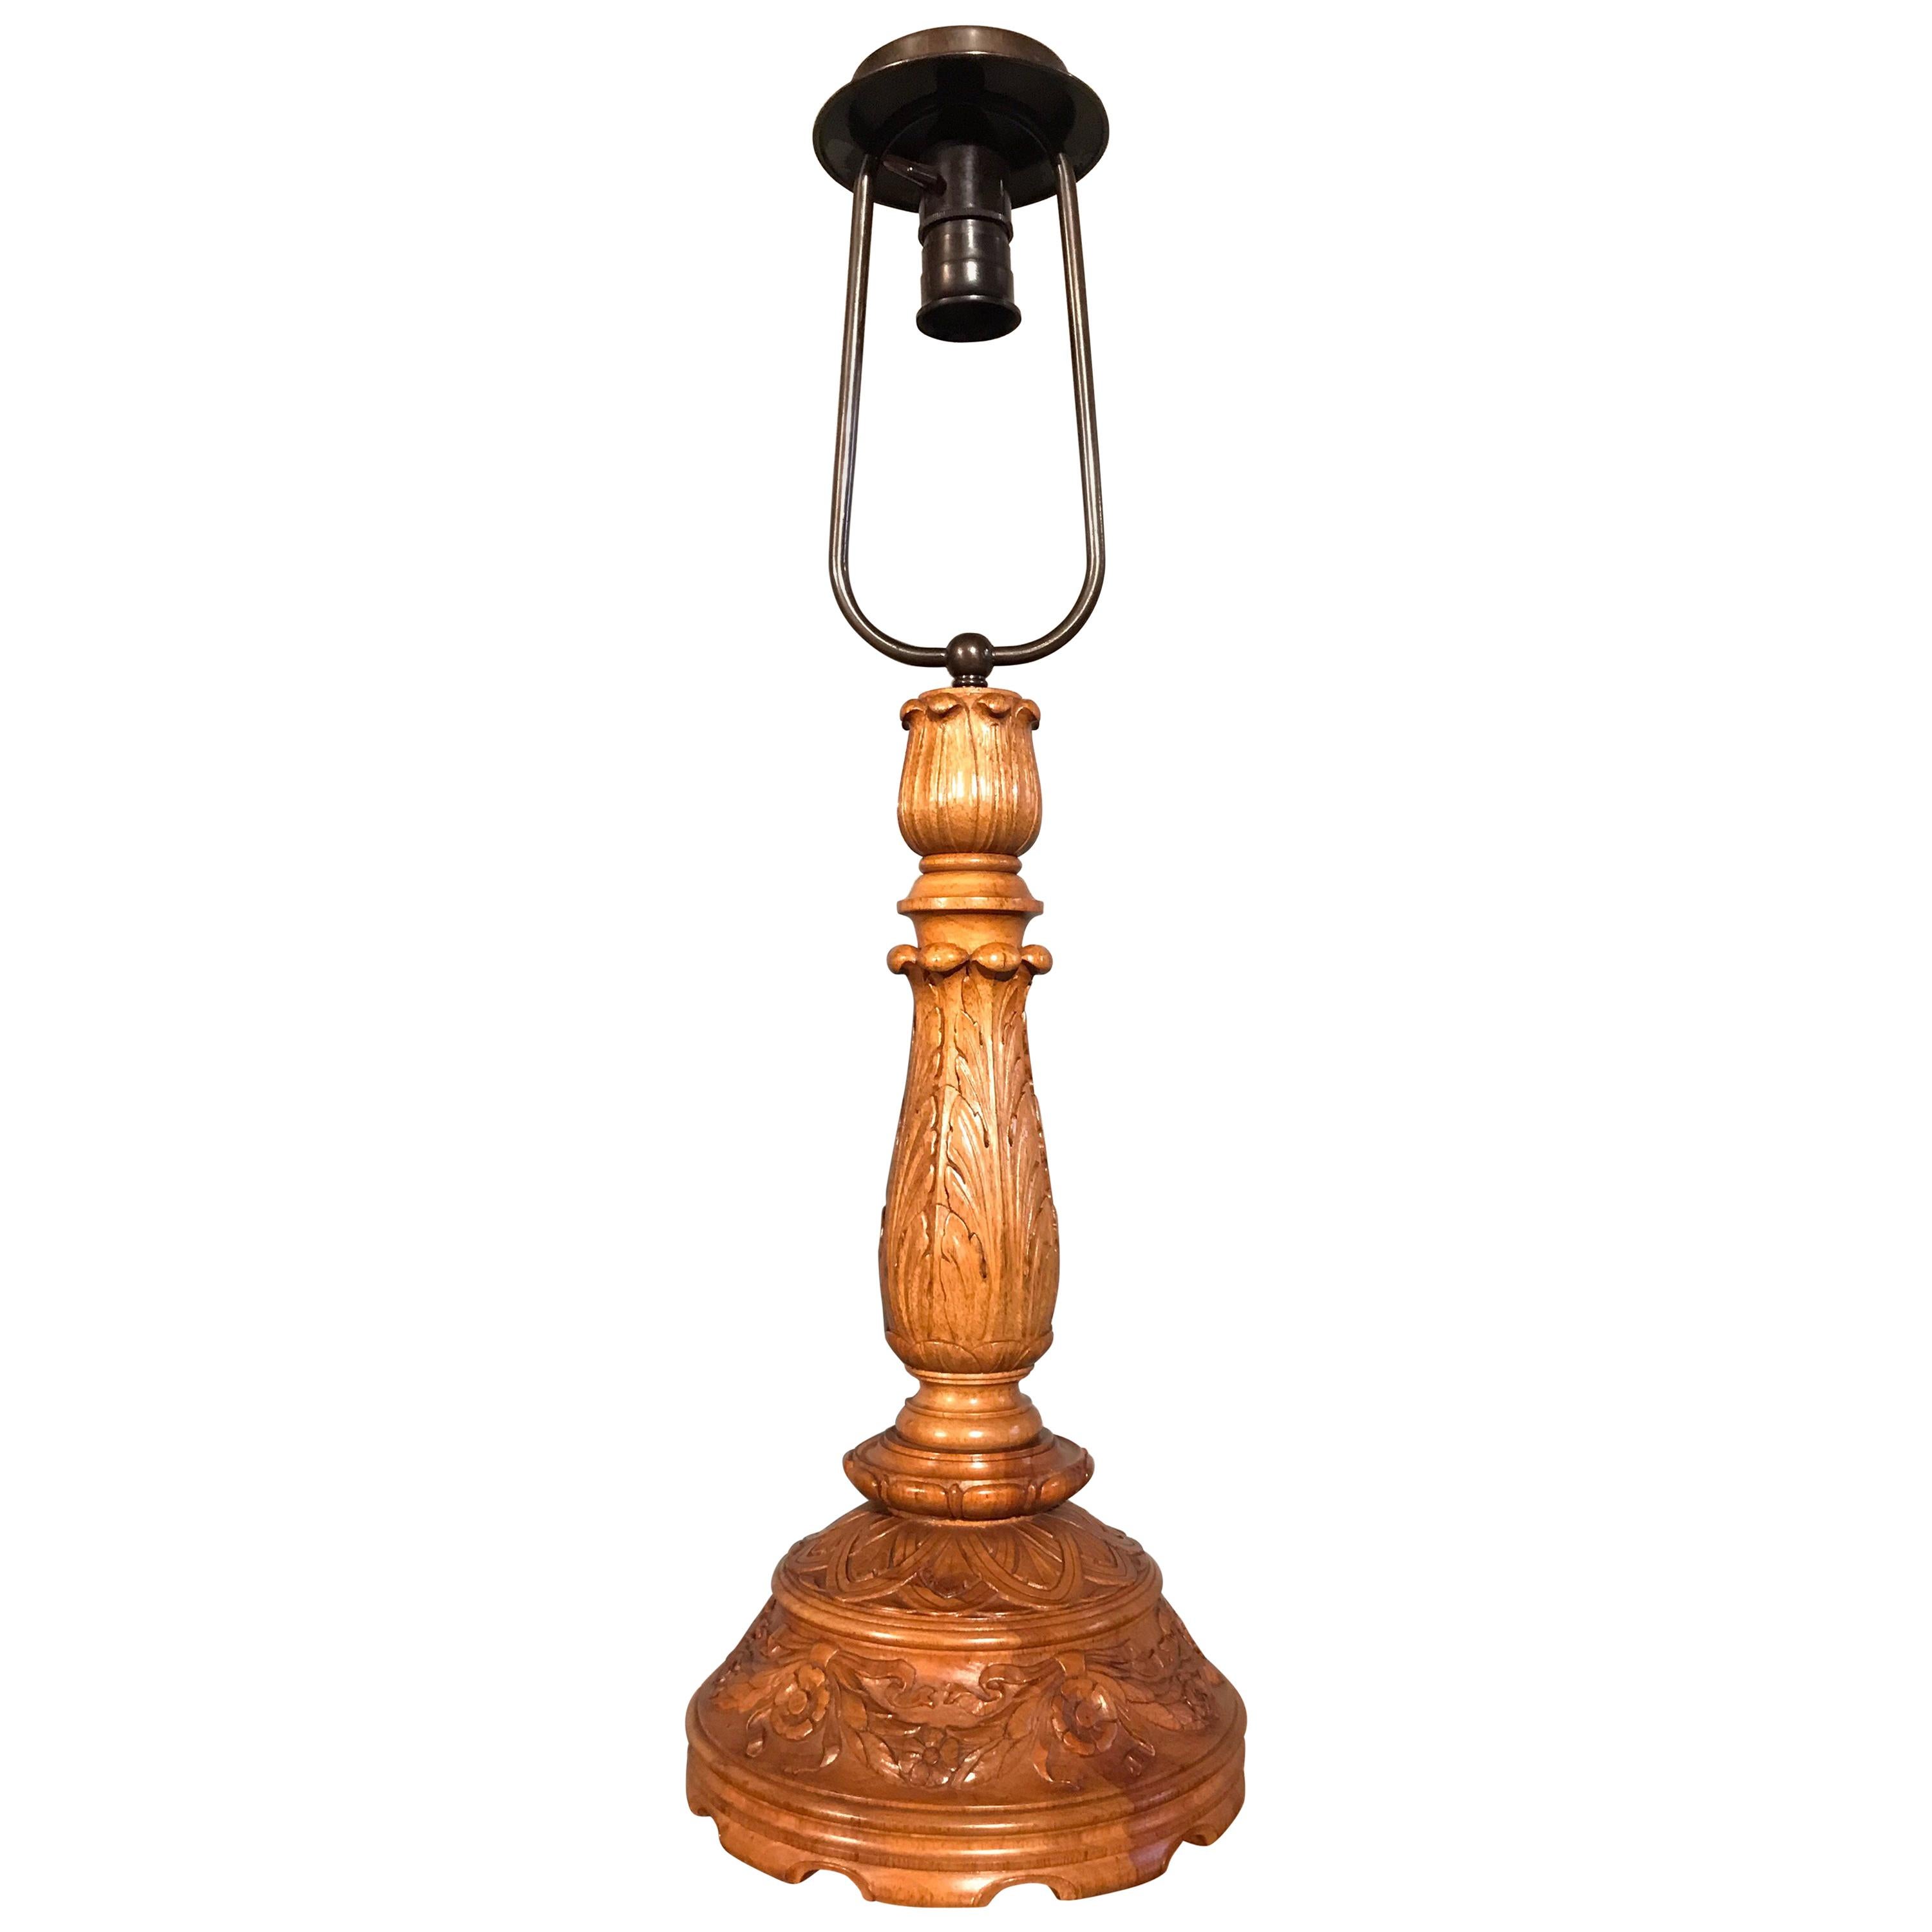 Hand Carved Table Lamp in Fruit Wood